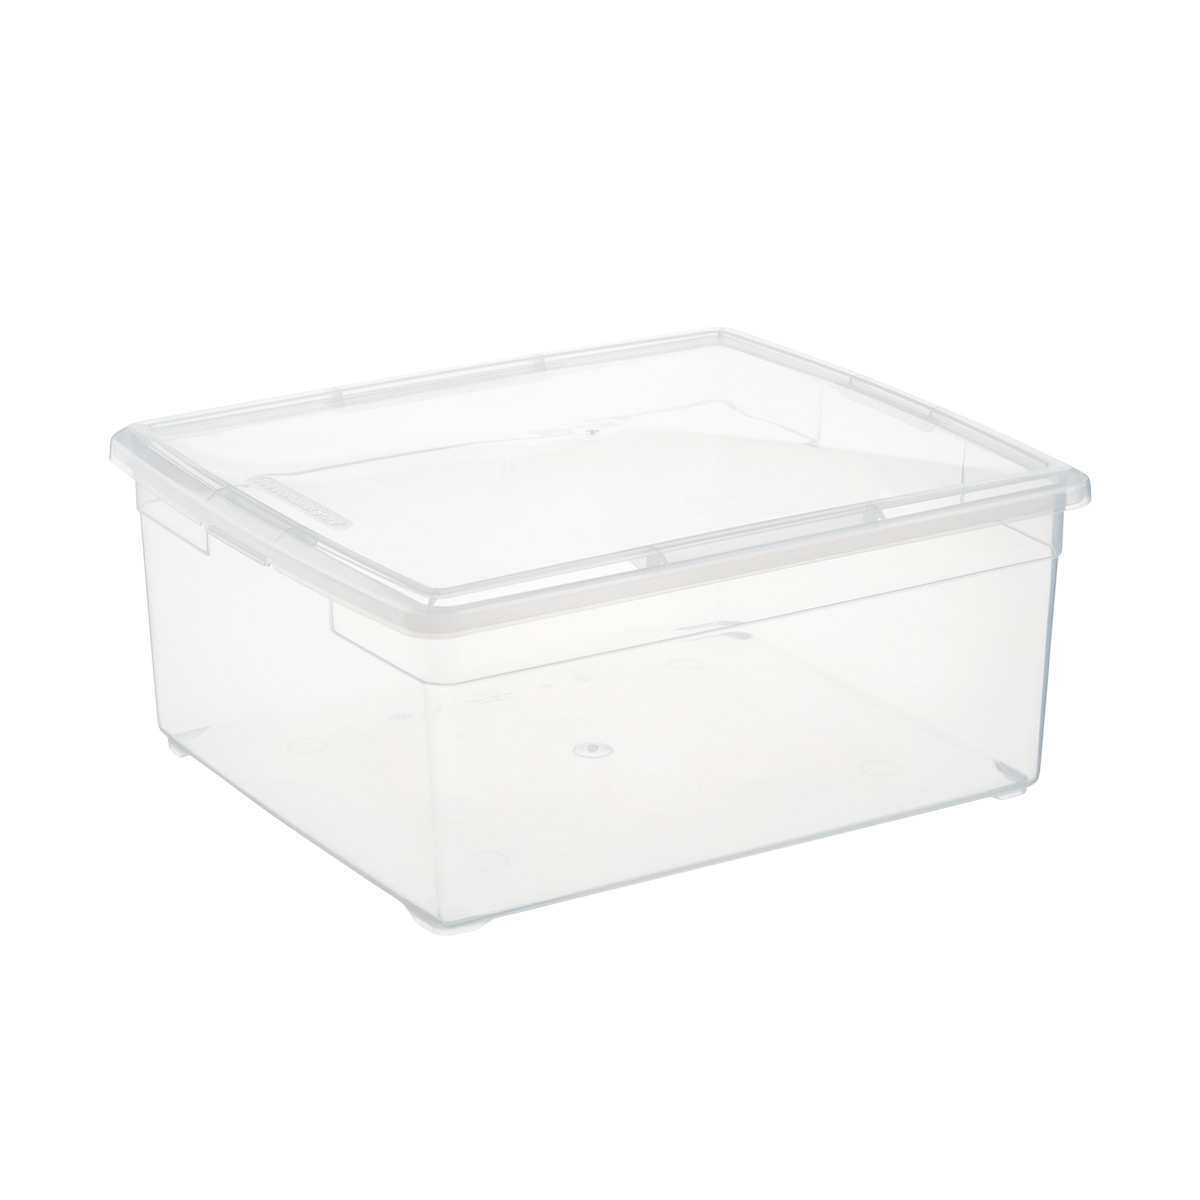 Details about   Sterilite Medium Clip Box Clear Home Storage Tote Container with Lid 24 Pack 